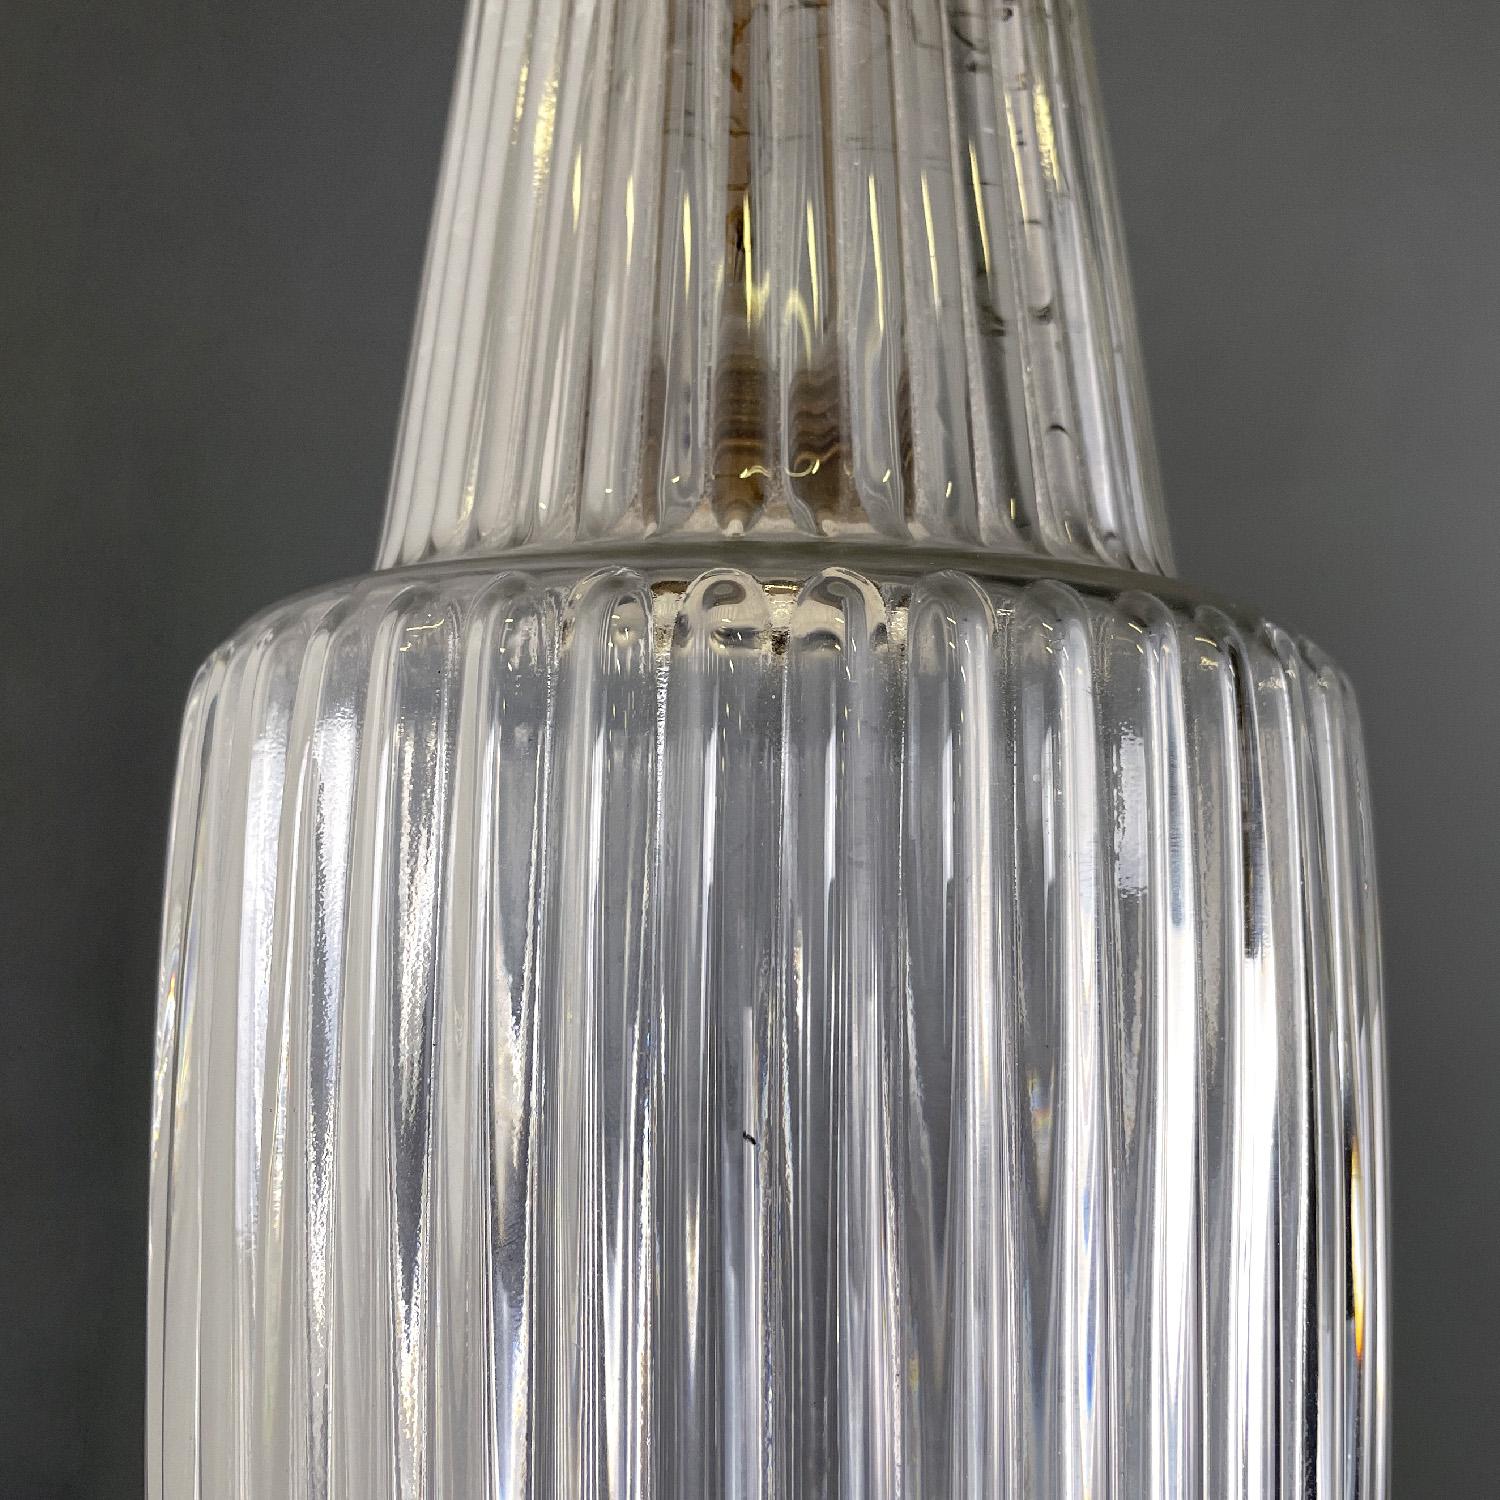 Italian mid-century modern golden plastic and fluted glass chandelier, 1950s For Sale 3